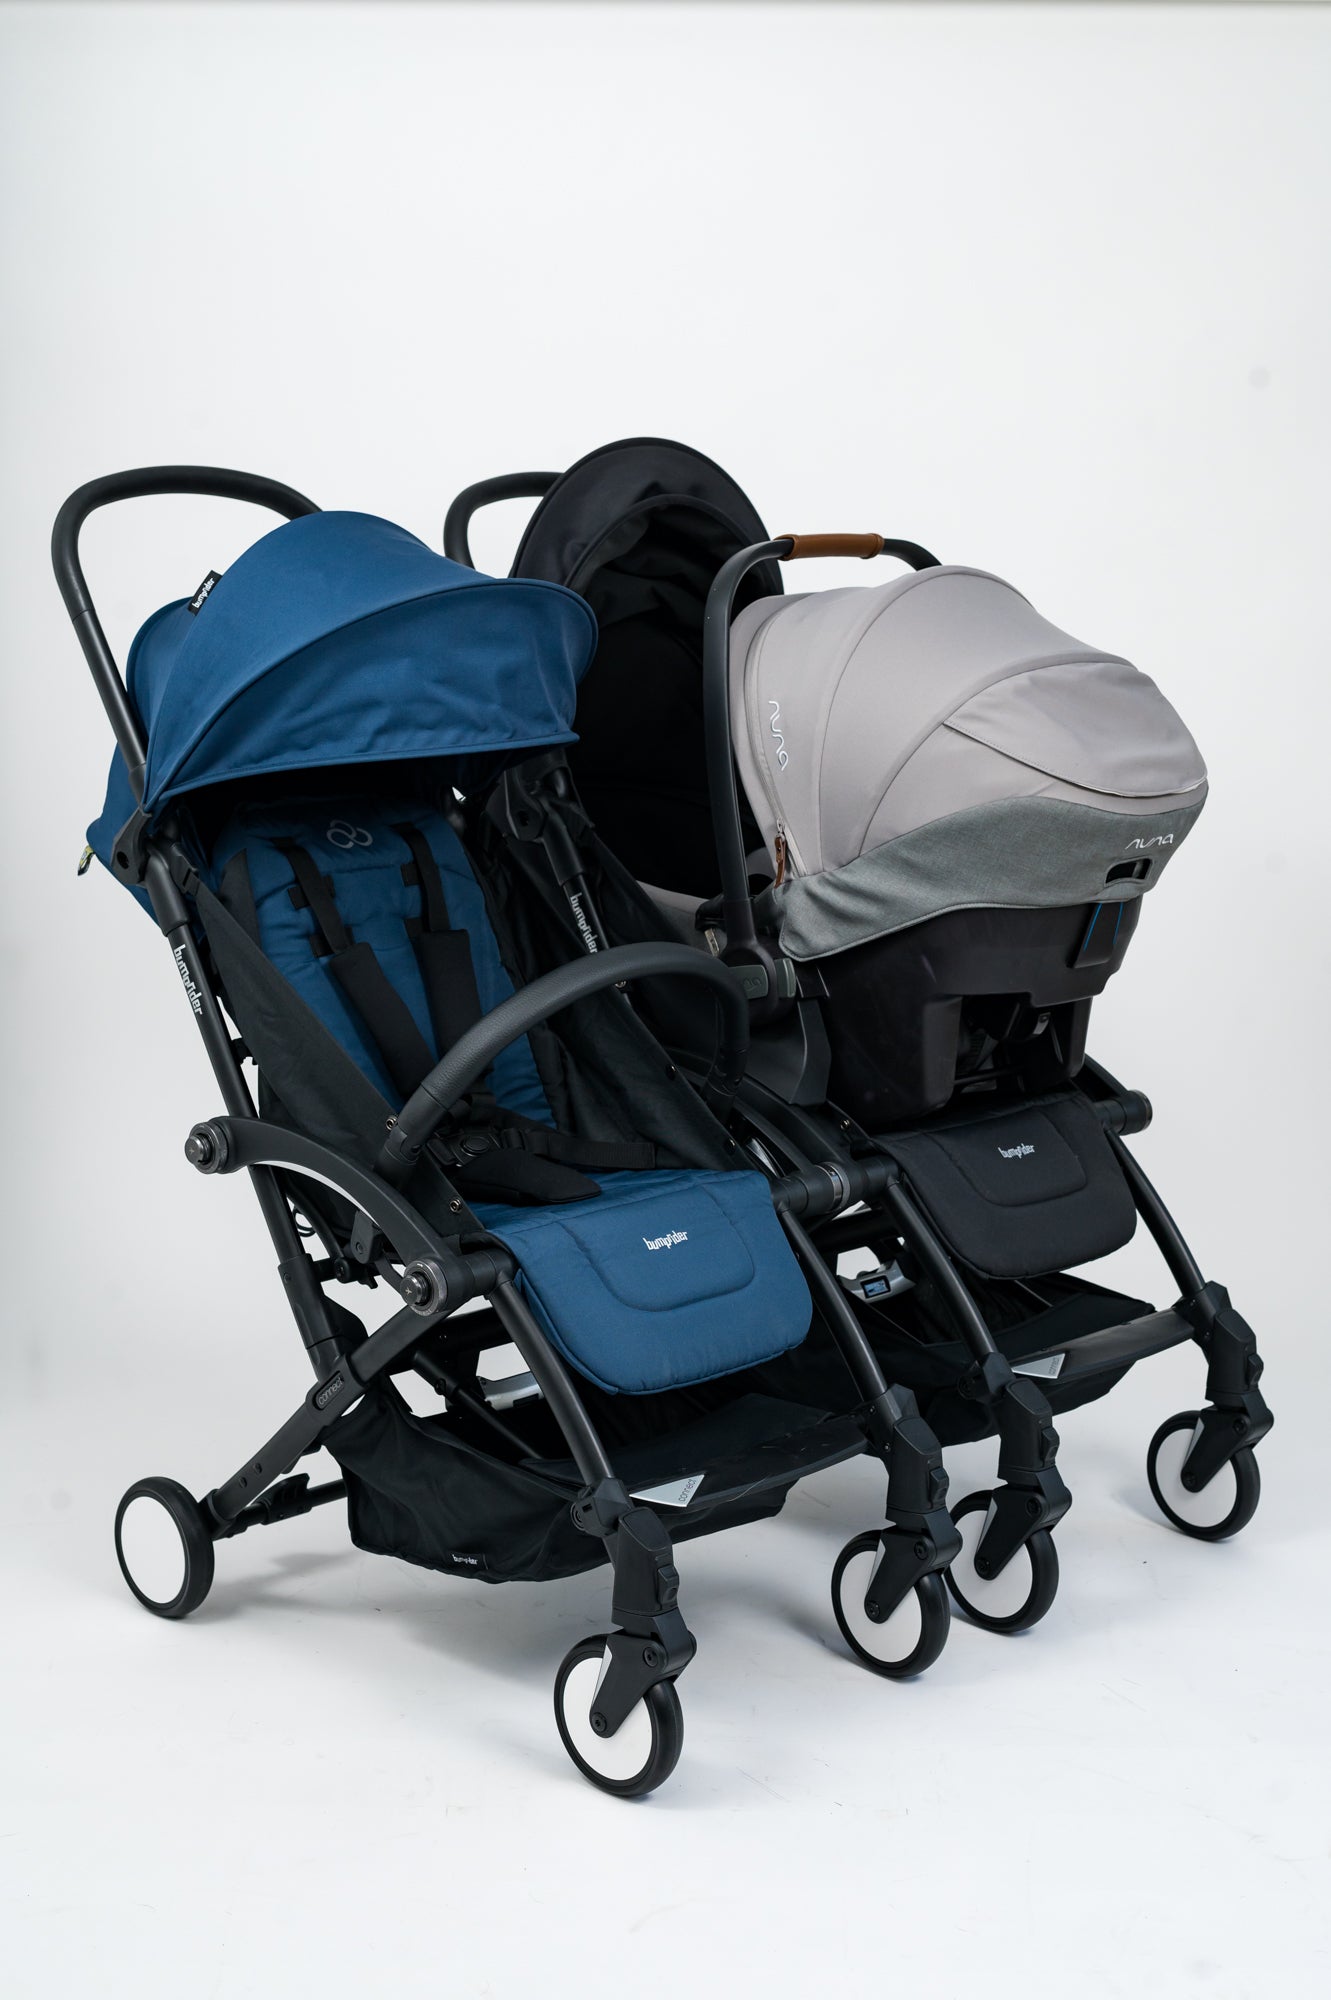 Bumprider Connect 3 Double with Car seat